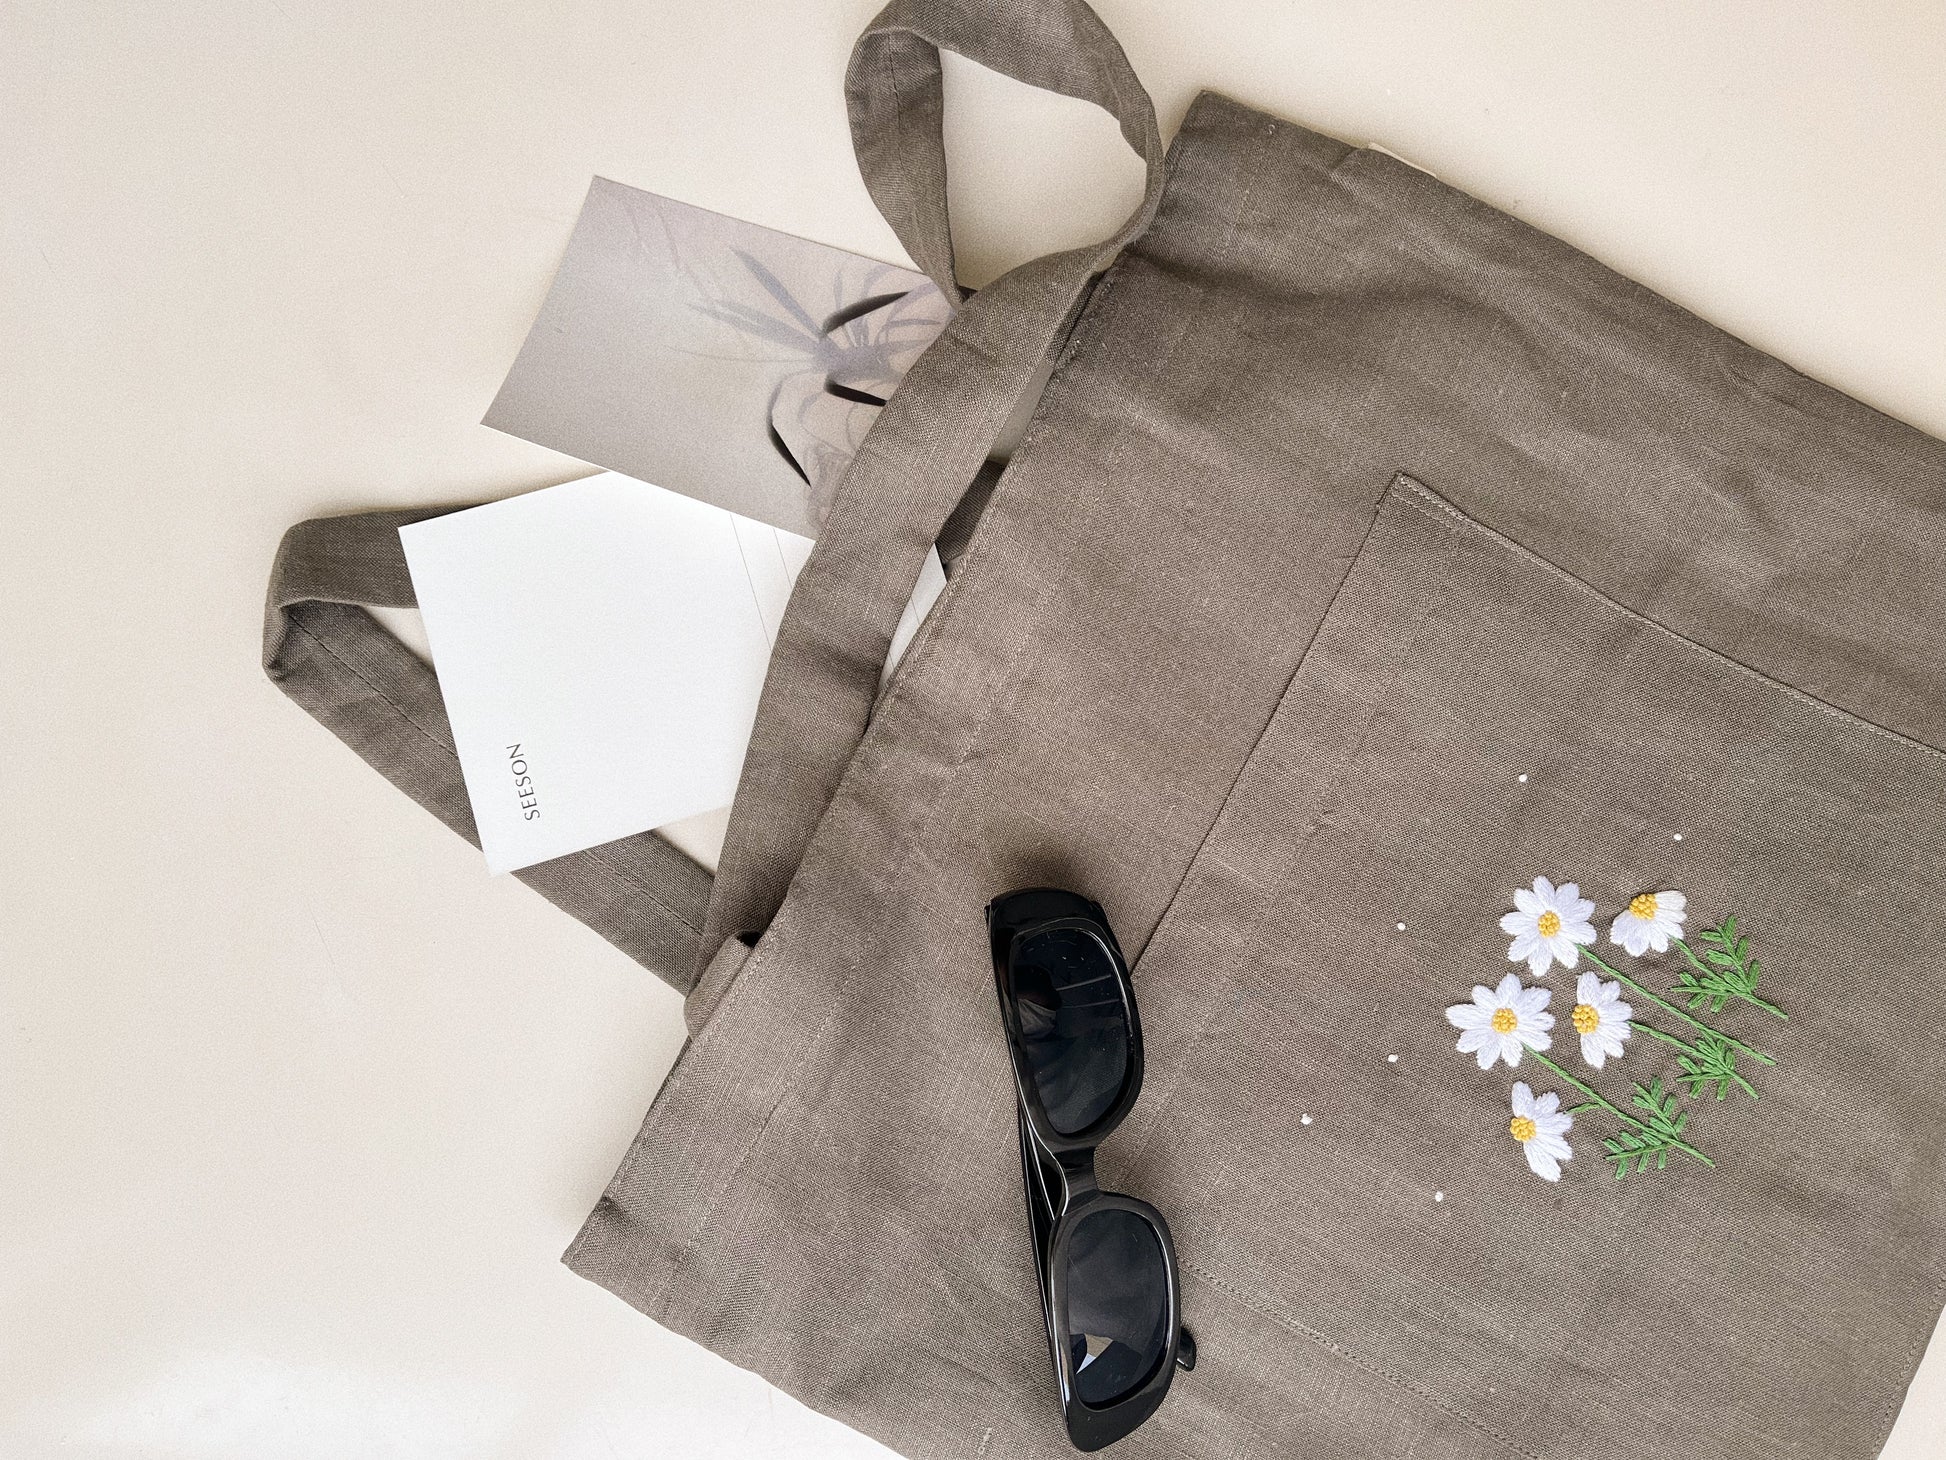 Linen Canvas Tote Bag with Hand Embroidery Daisy Flower 